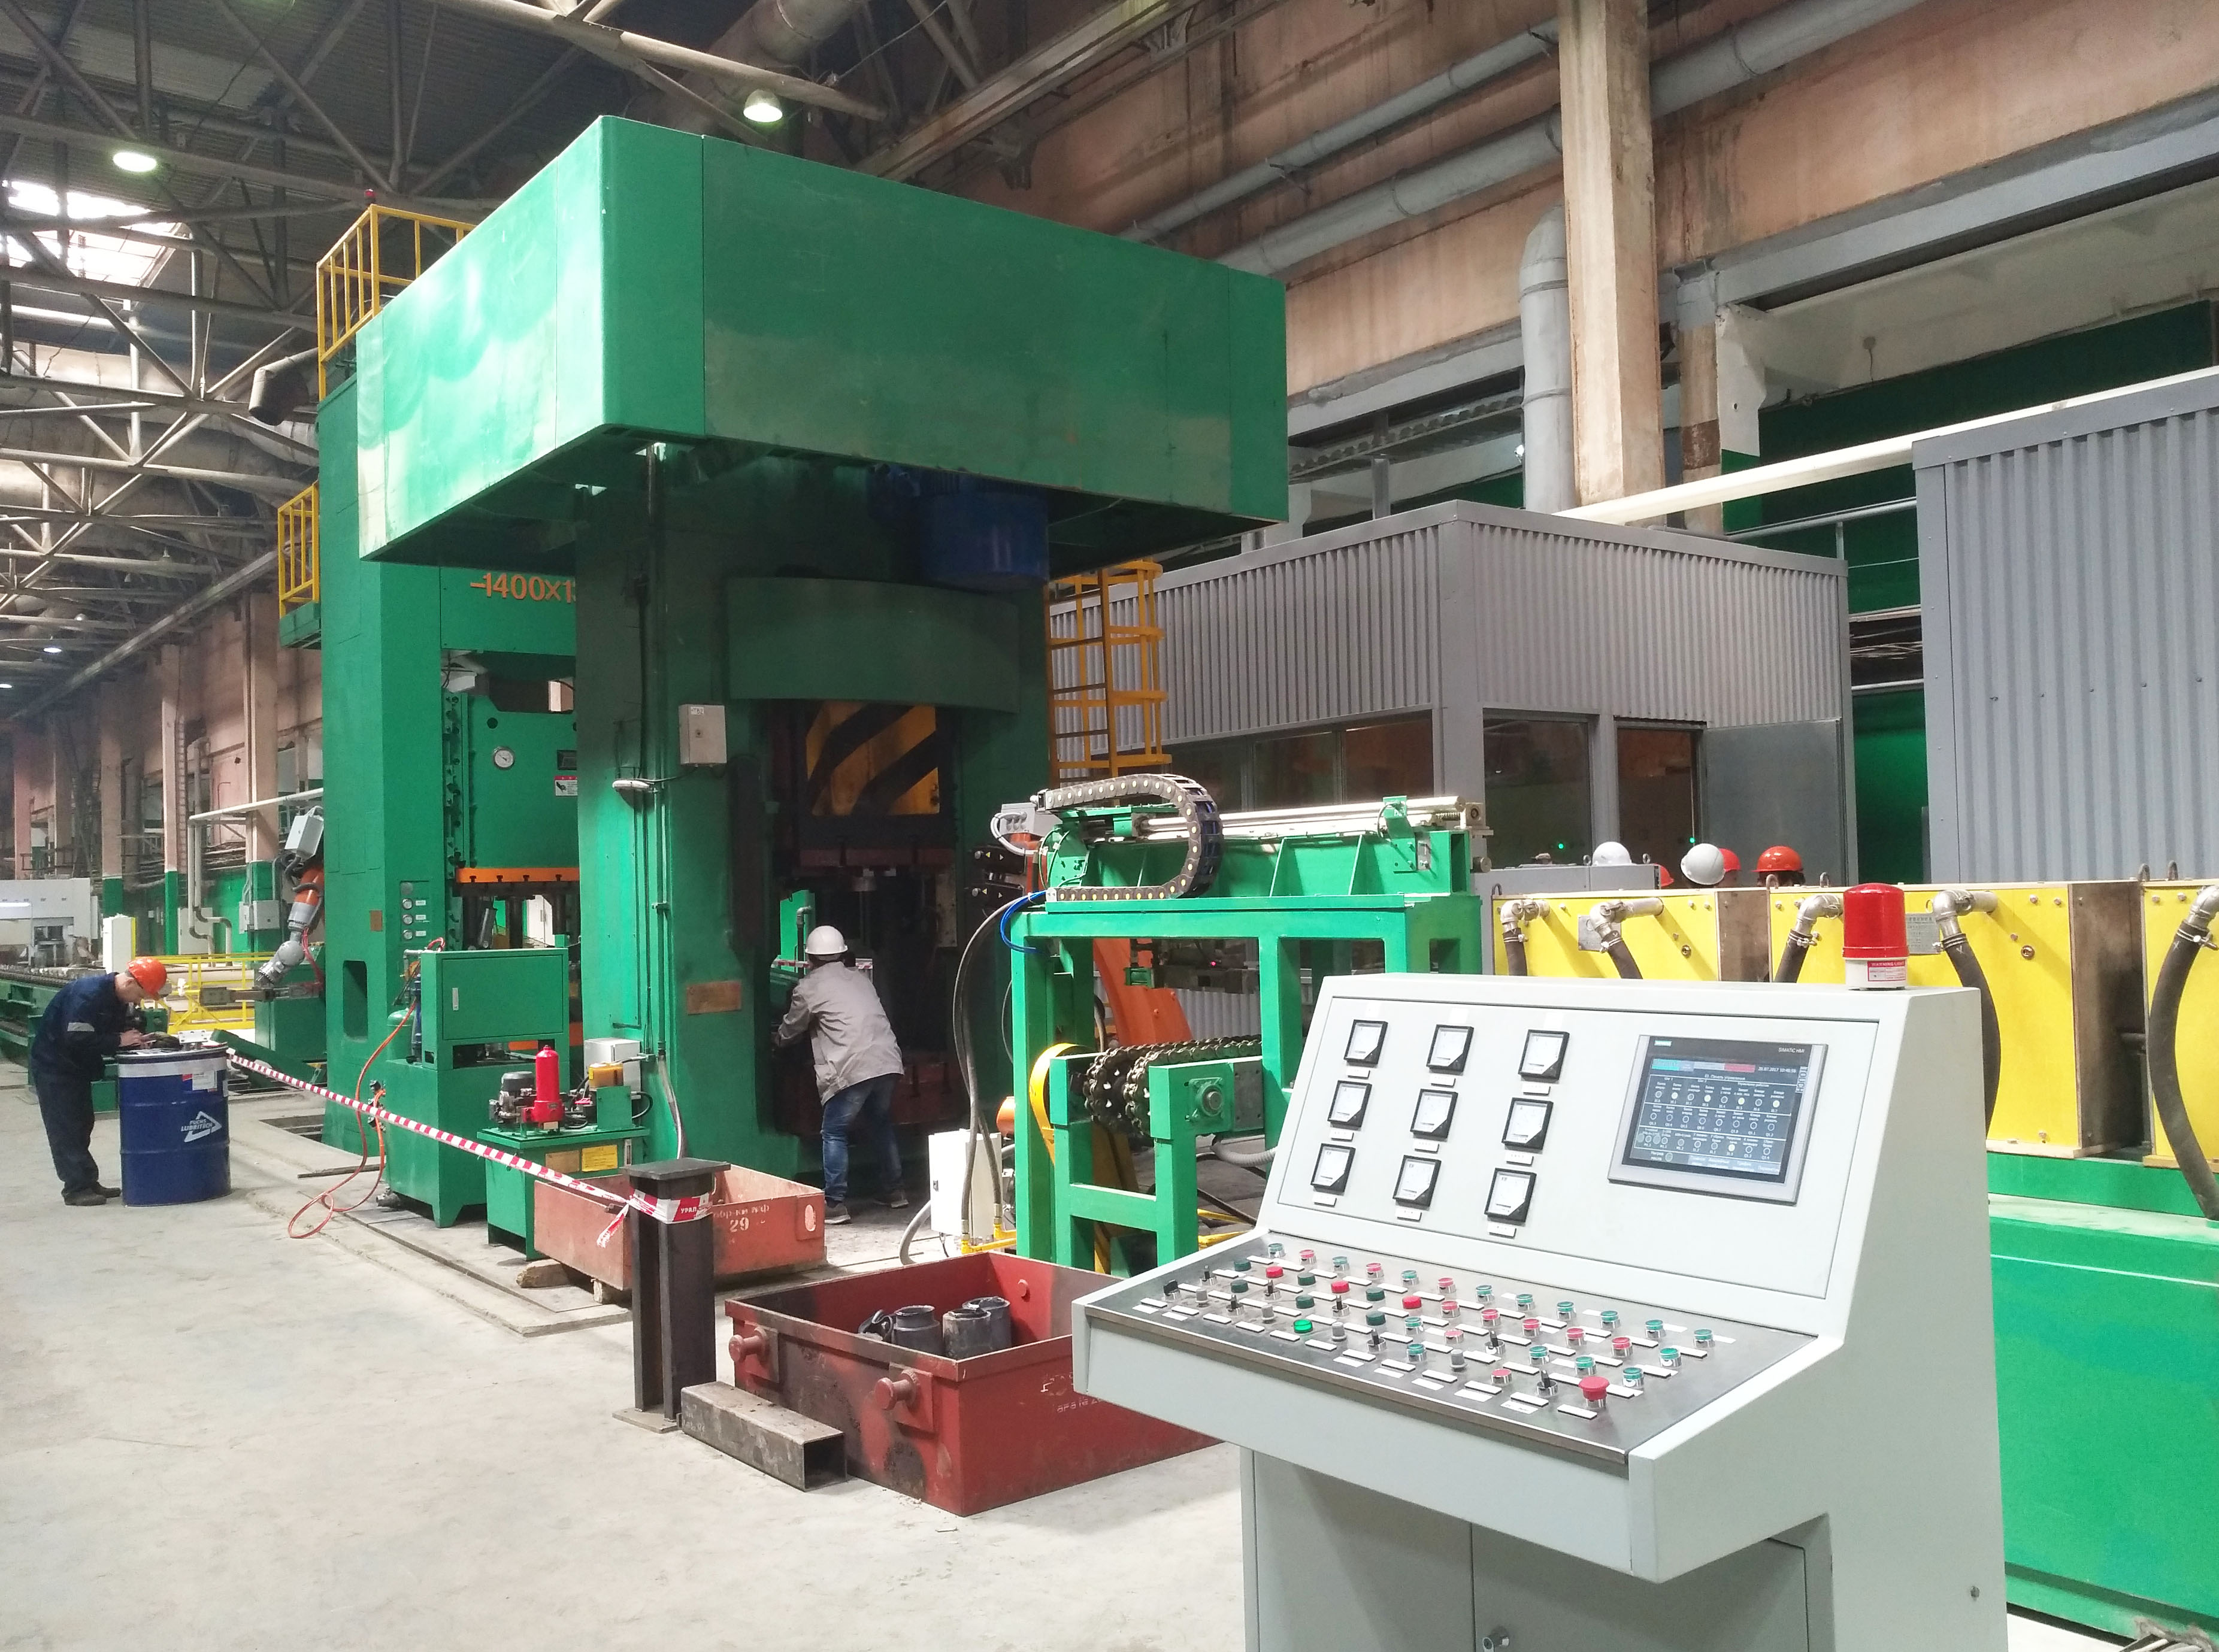 J58K electric screw press automated production line produces pipe clamps in Russia